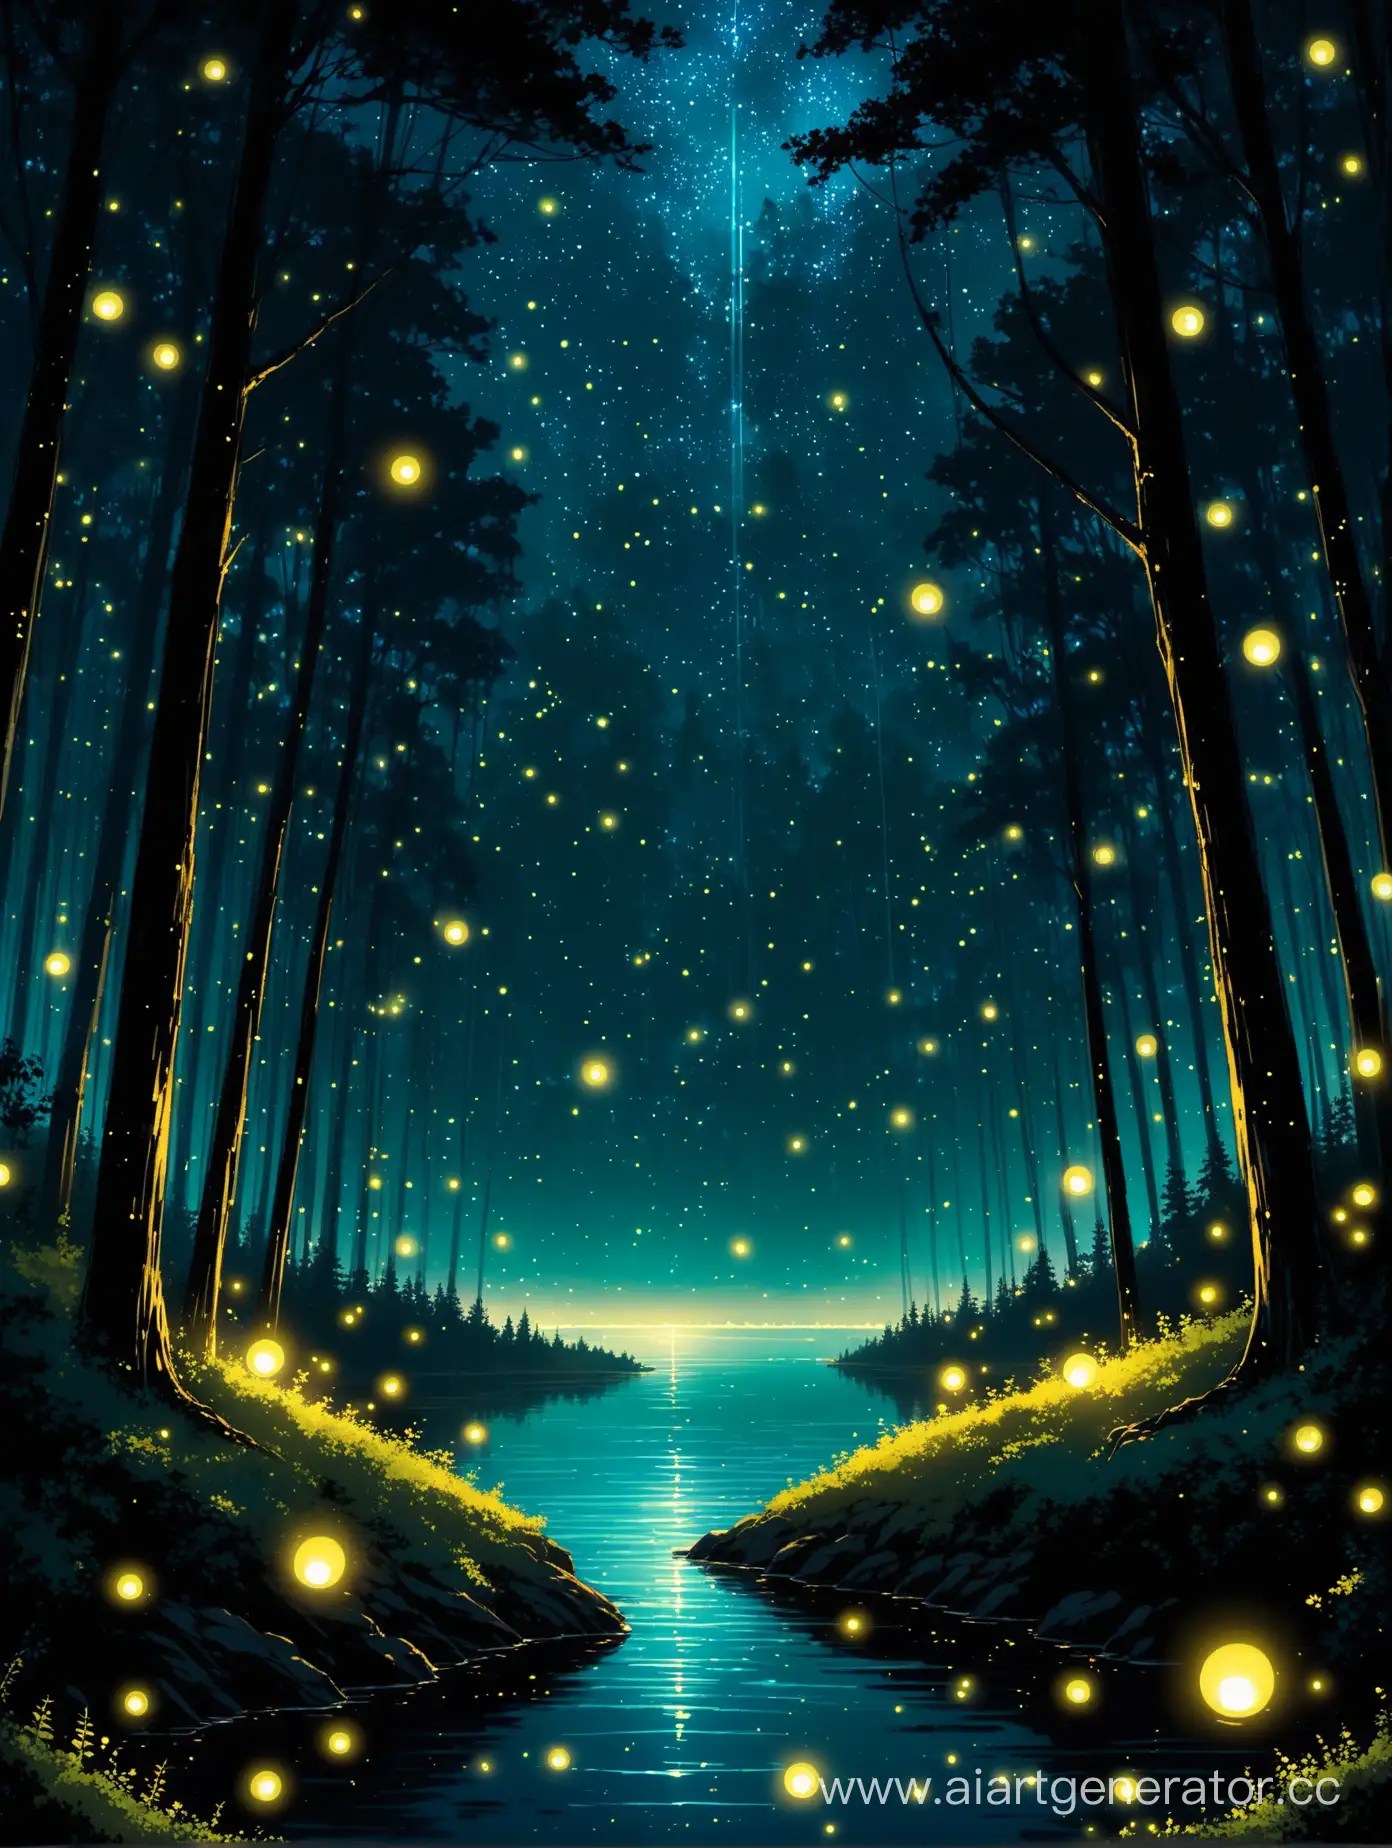 Enchanted-Forest-Night-Scene-with-Glowing-Fireflies-and-Reflective-Lake